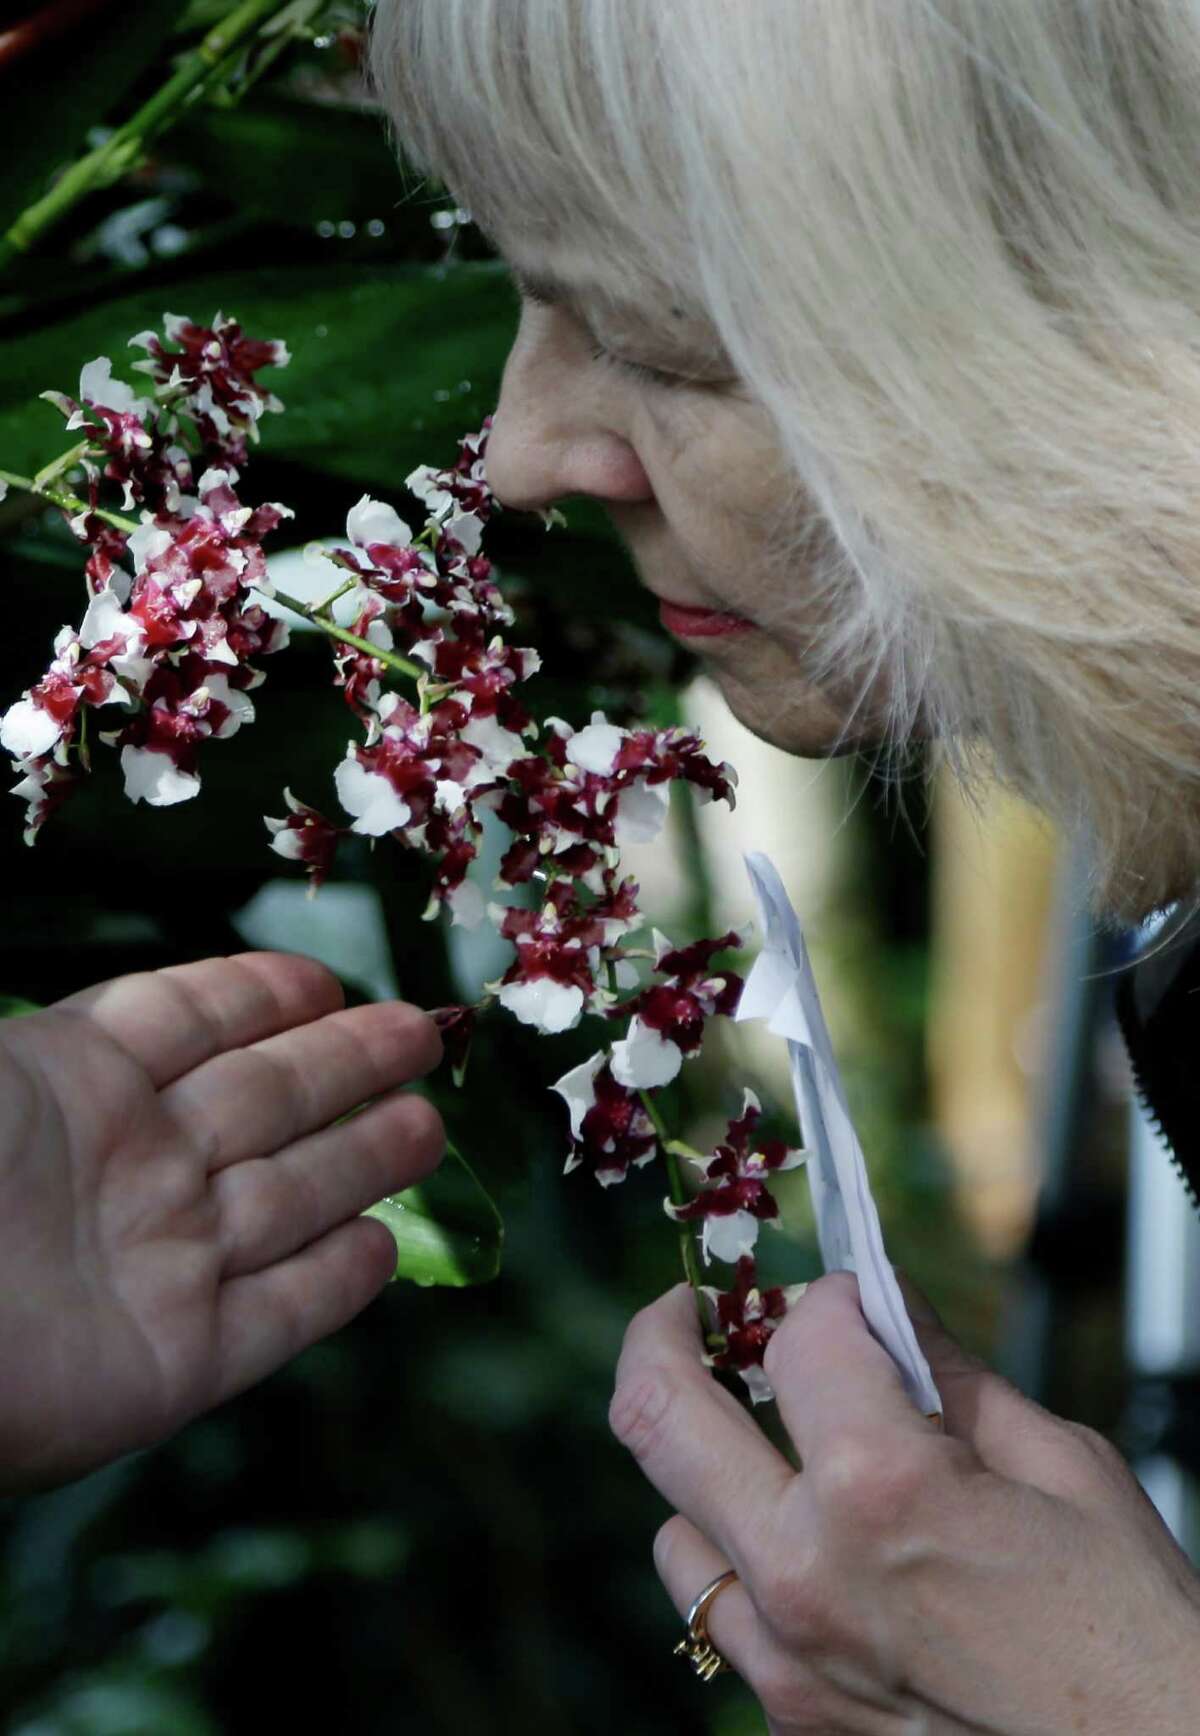 A woman smells Sharry Baby, also known as the chocolate orchid, during a press preview of the orchid show at the New York Botanical Gardens in New York, Thursday, Feb. 28, 2013. The botanical gardens will open their annual orchid show to the public on March 2, 2013